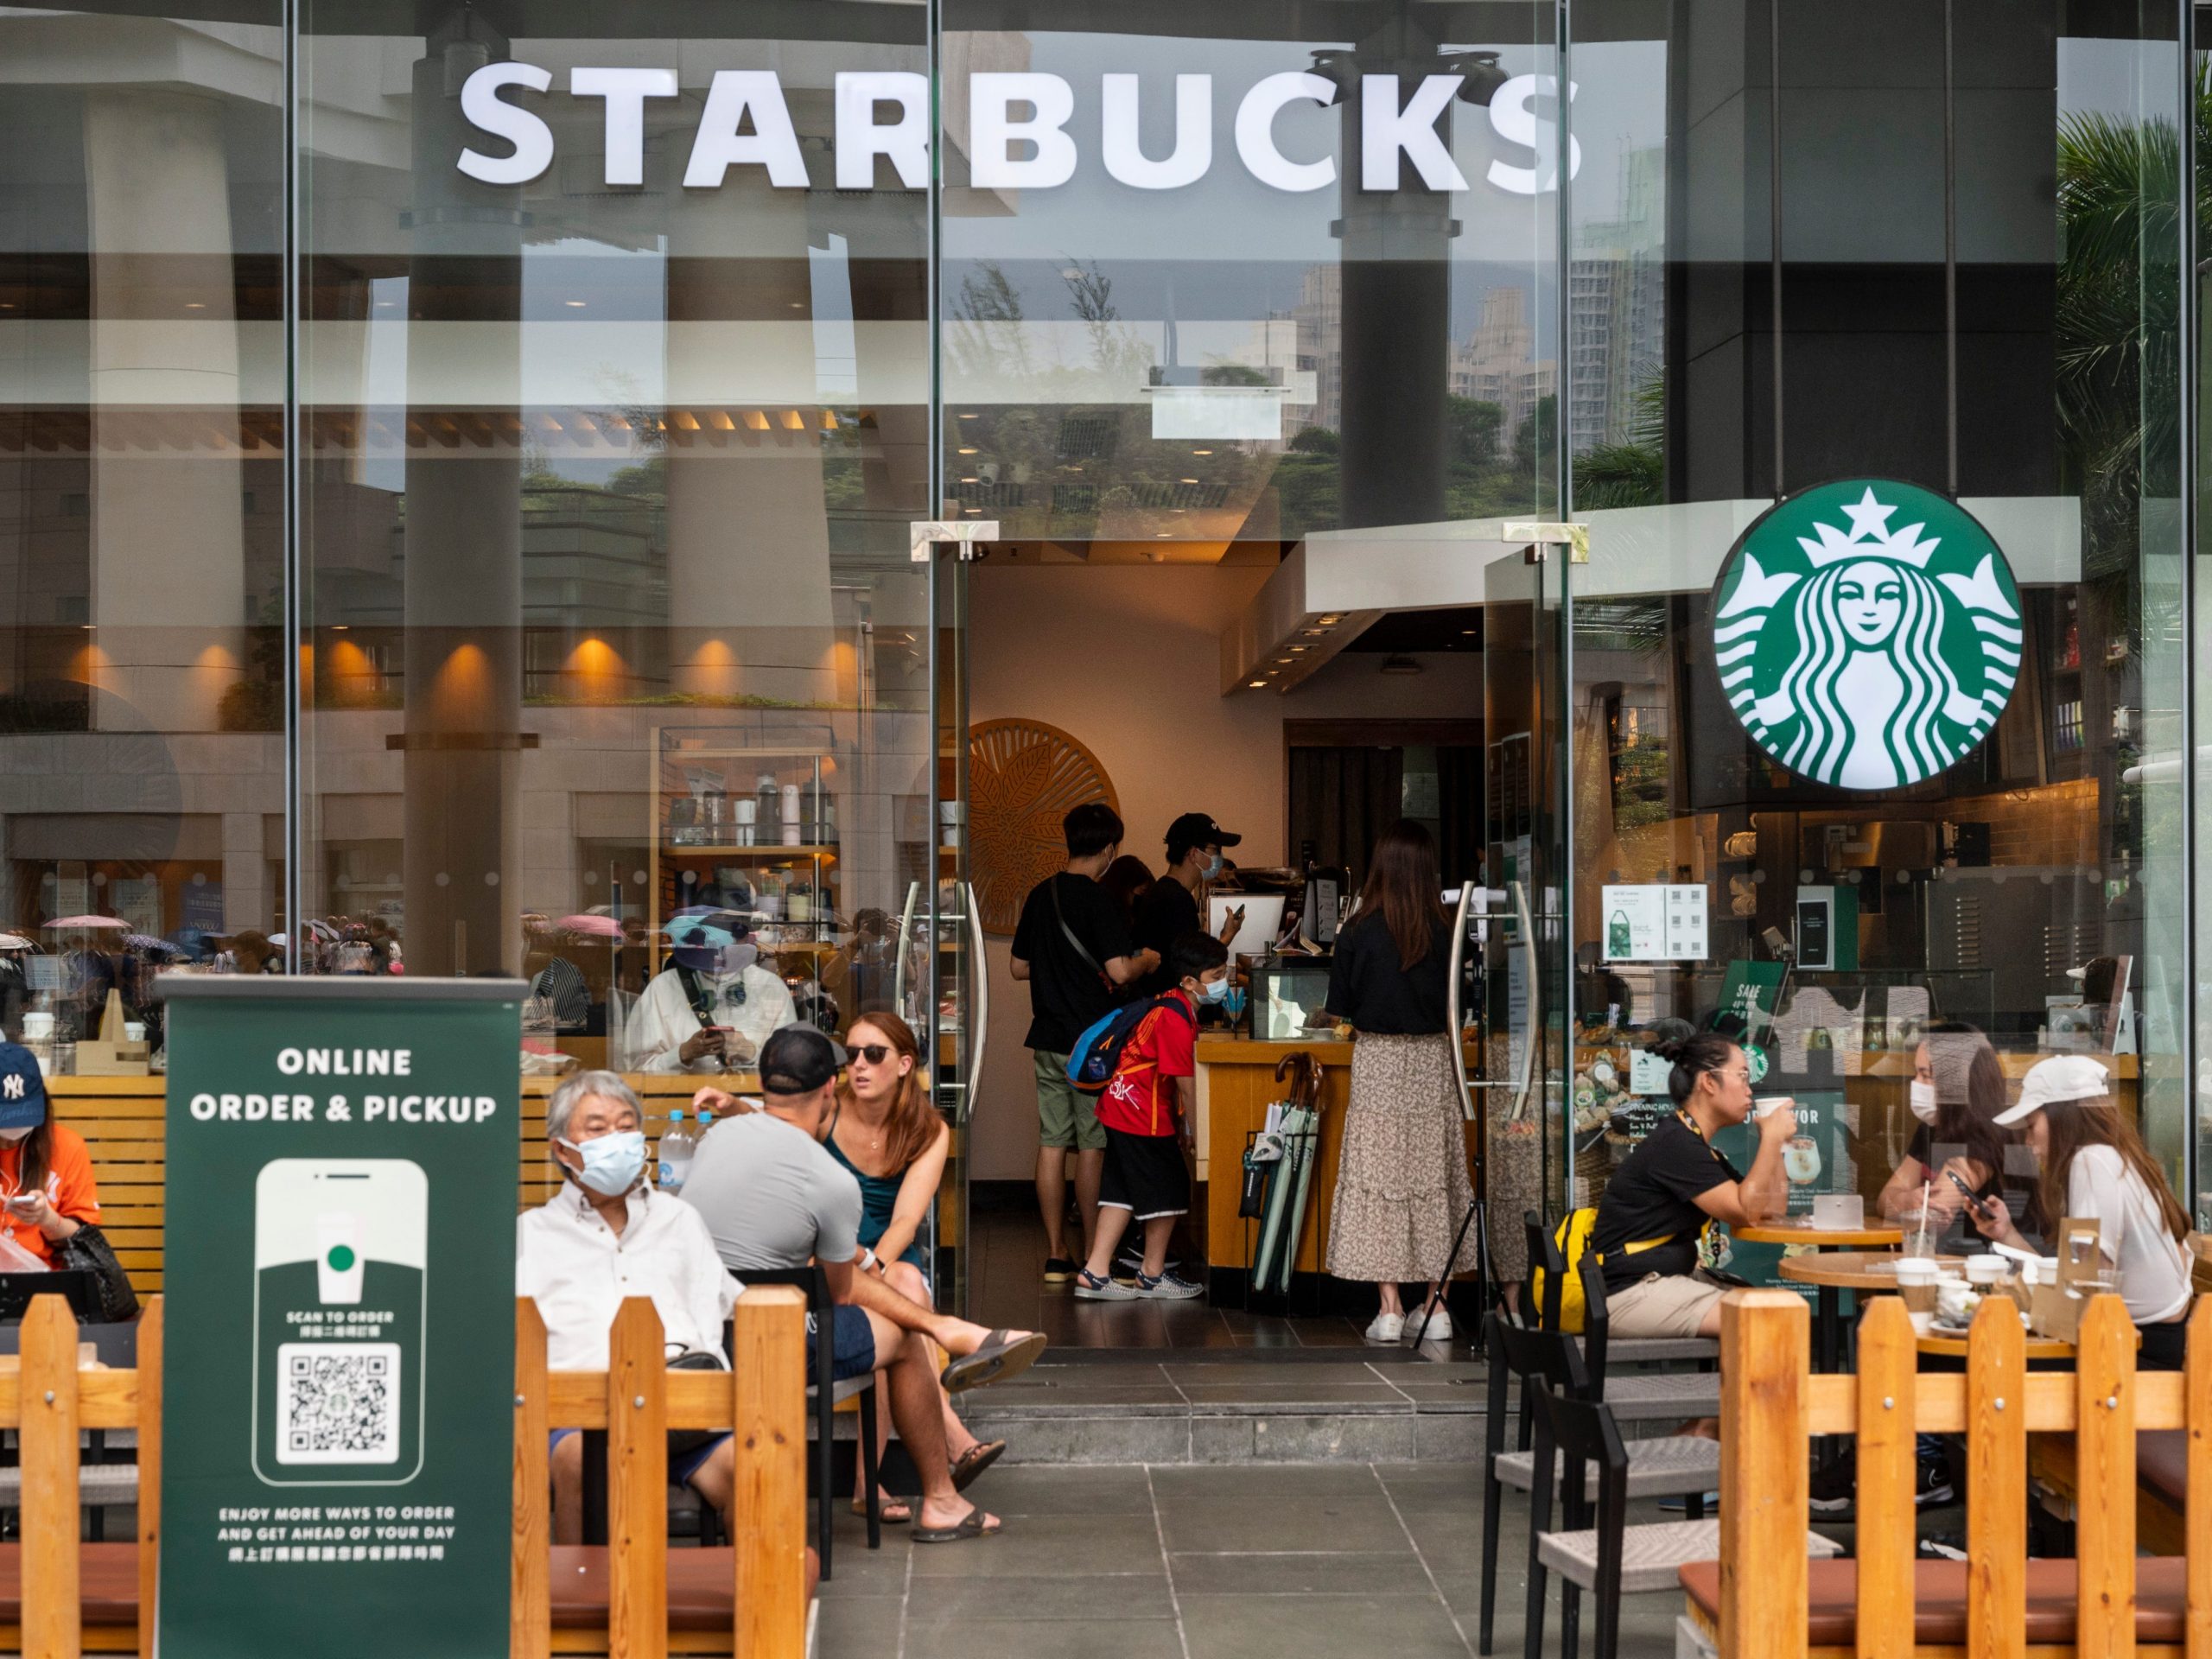 Customers are seen at the American multinational chain Starbucks Coffee store seen in Hong Kong's Tung Chung district.